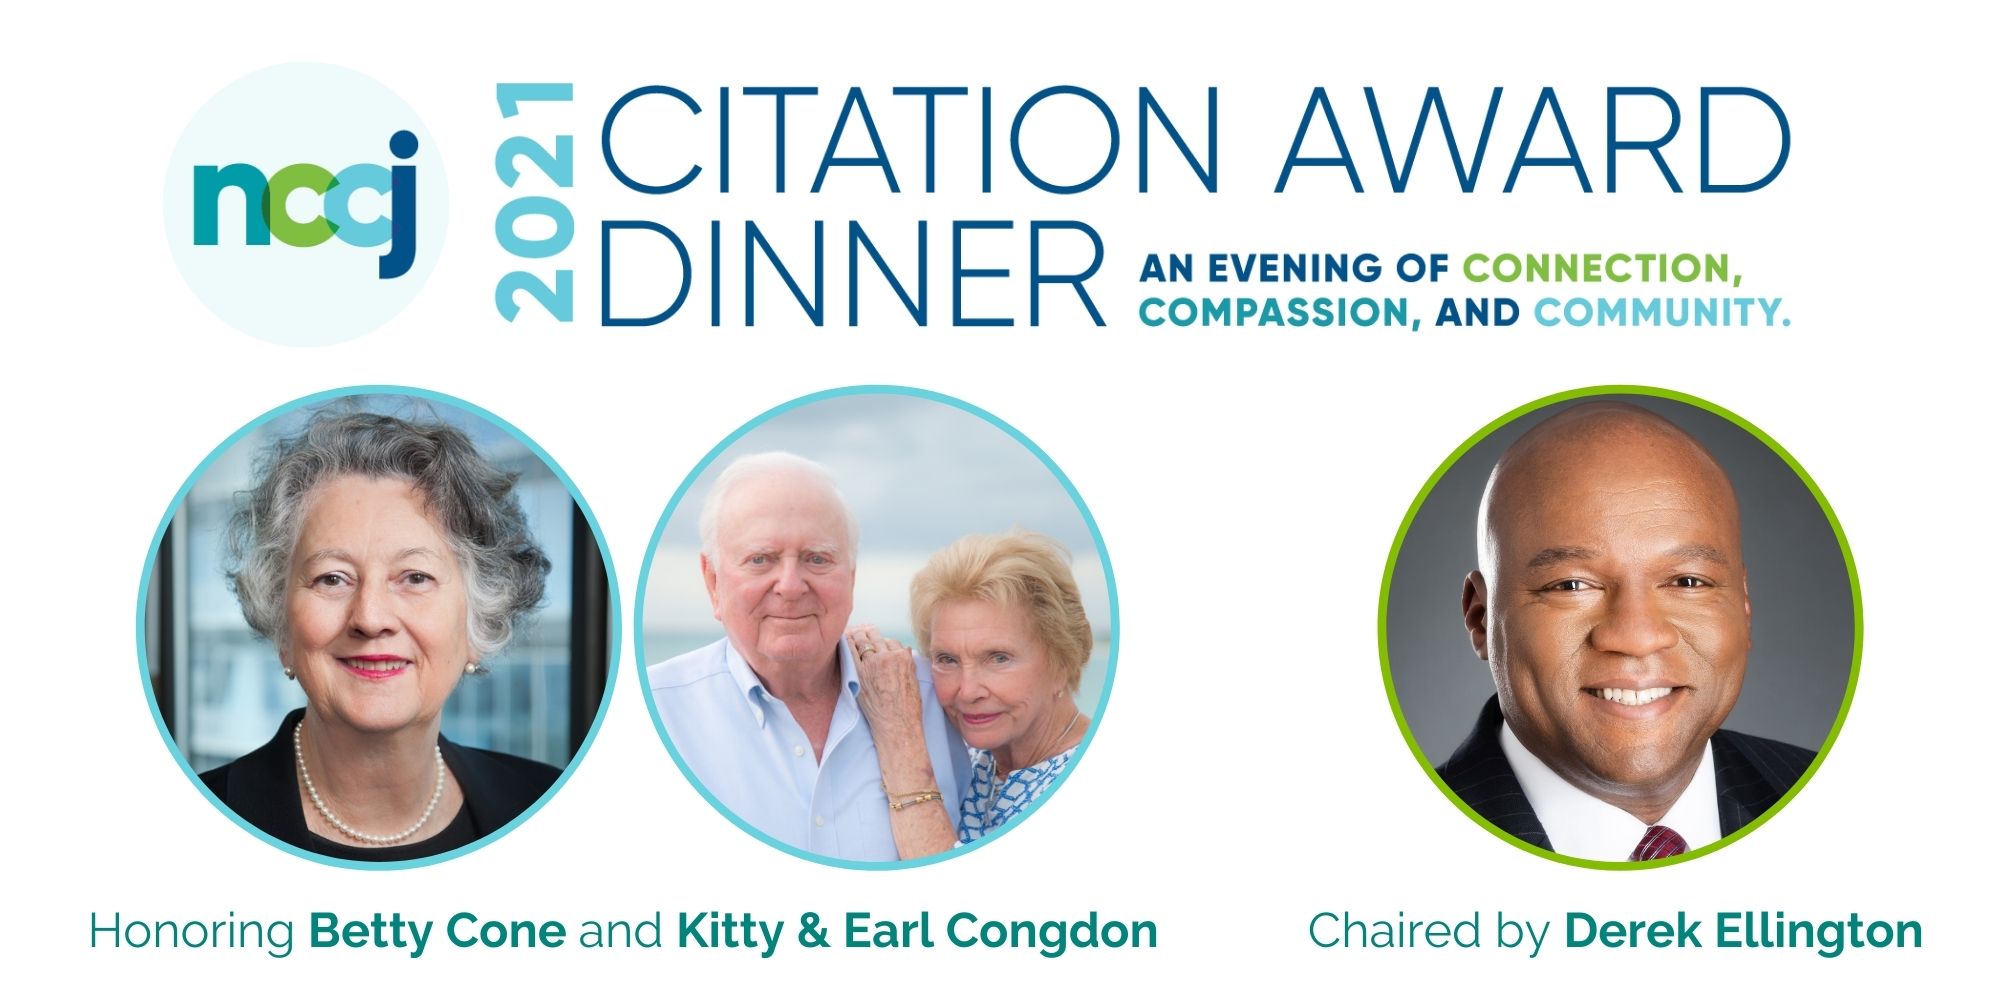 NCCJ's 2021 Citation Award Dinner: An Evening of Connection, Compassion and Community. Honoring Betty Cone and Kitty & Earl Condon. Chaired by Derek Ellington.